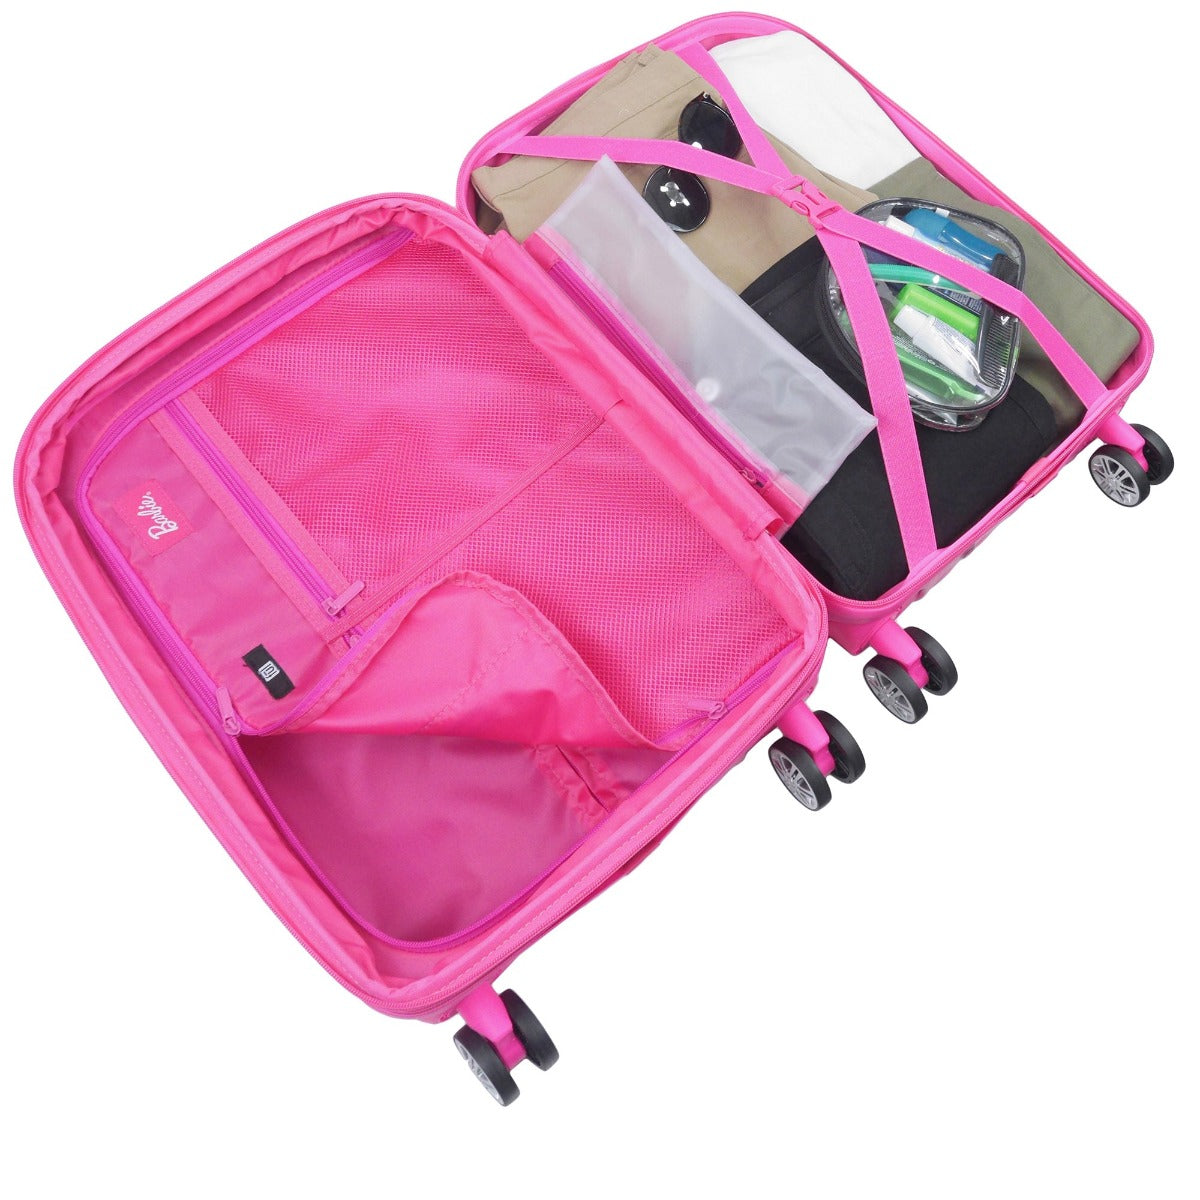 Hot pink Barbie quilted texture 22.5-inch hard-sided carry-on spinner suitcase rolling luggage